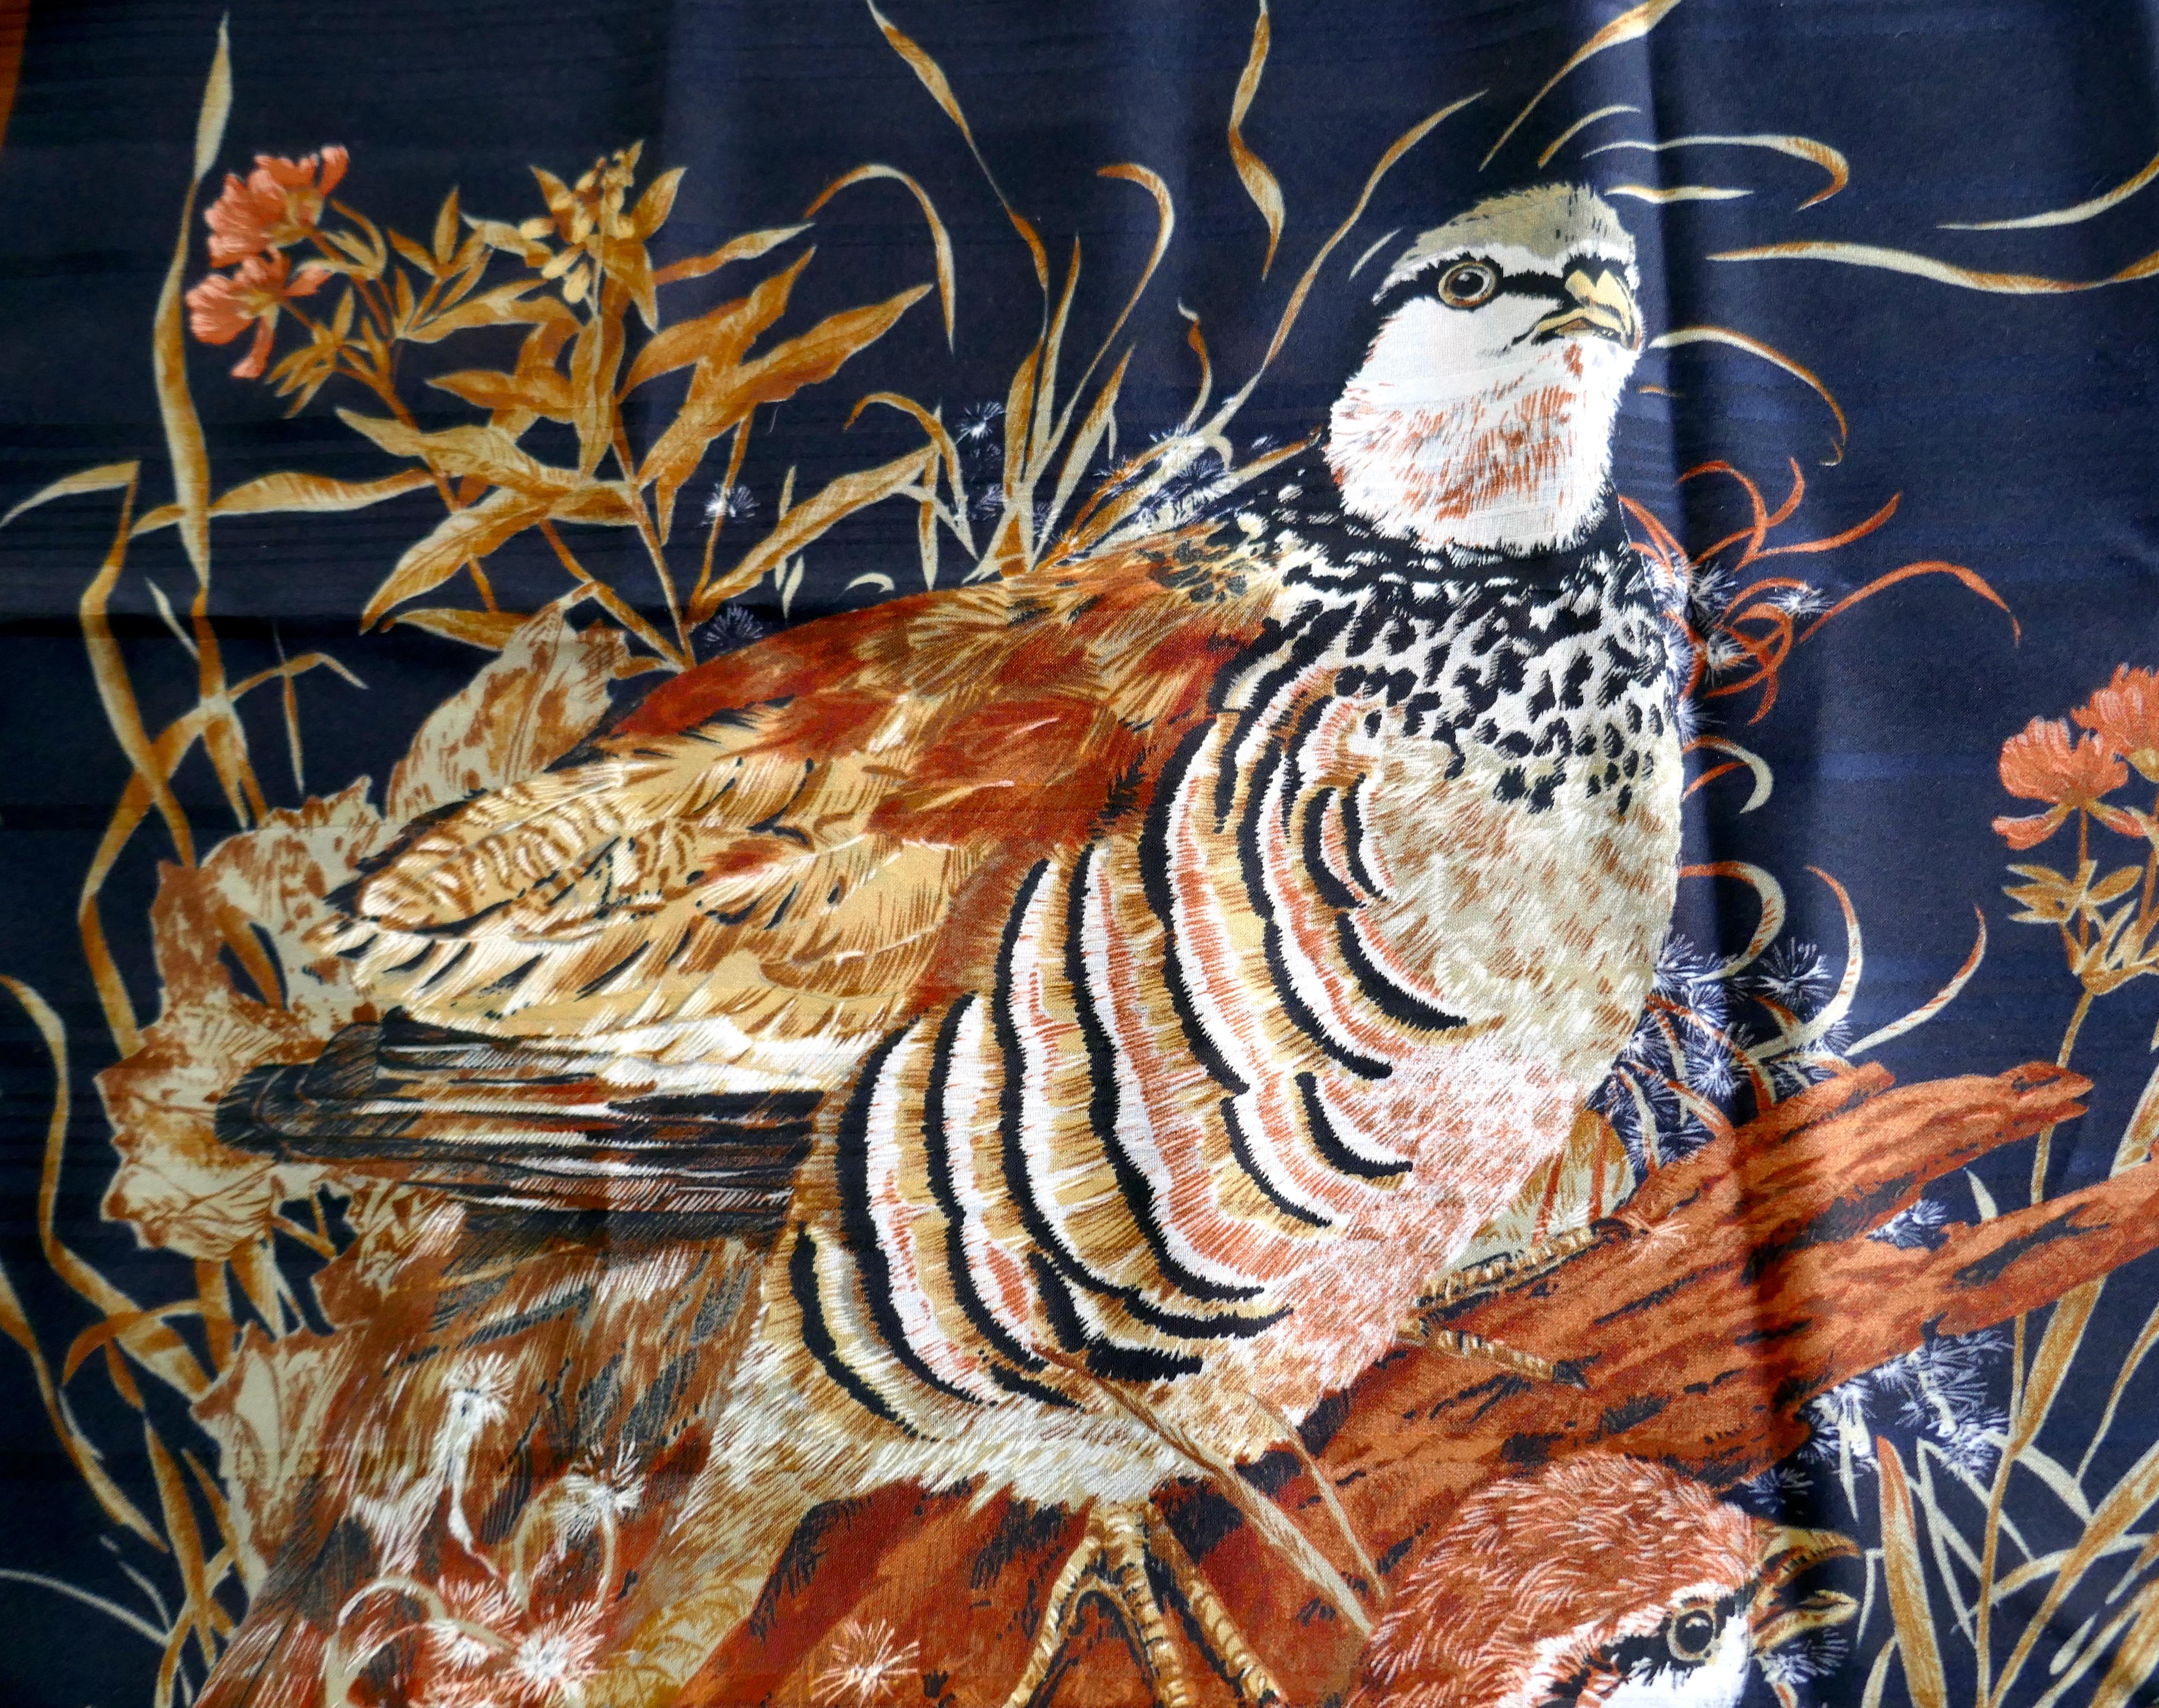 Black Square Chiffon Scarf “Partridges in the Grass” 